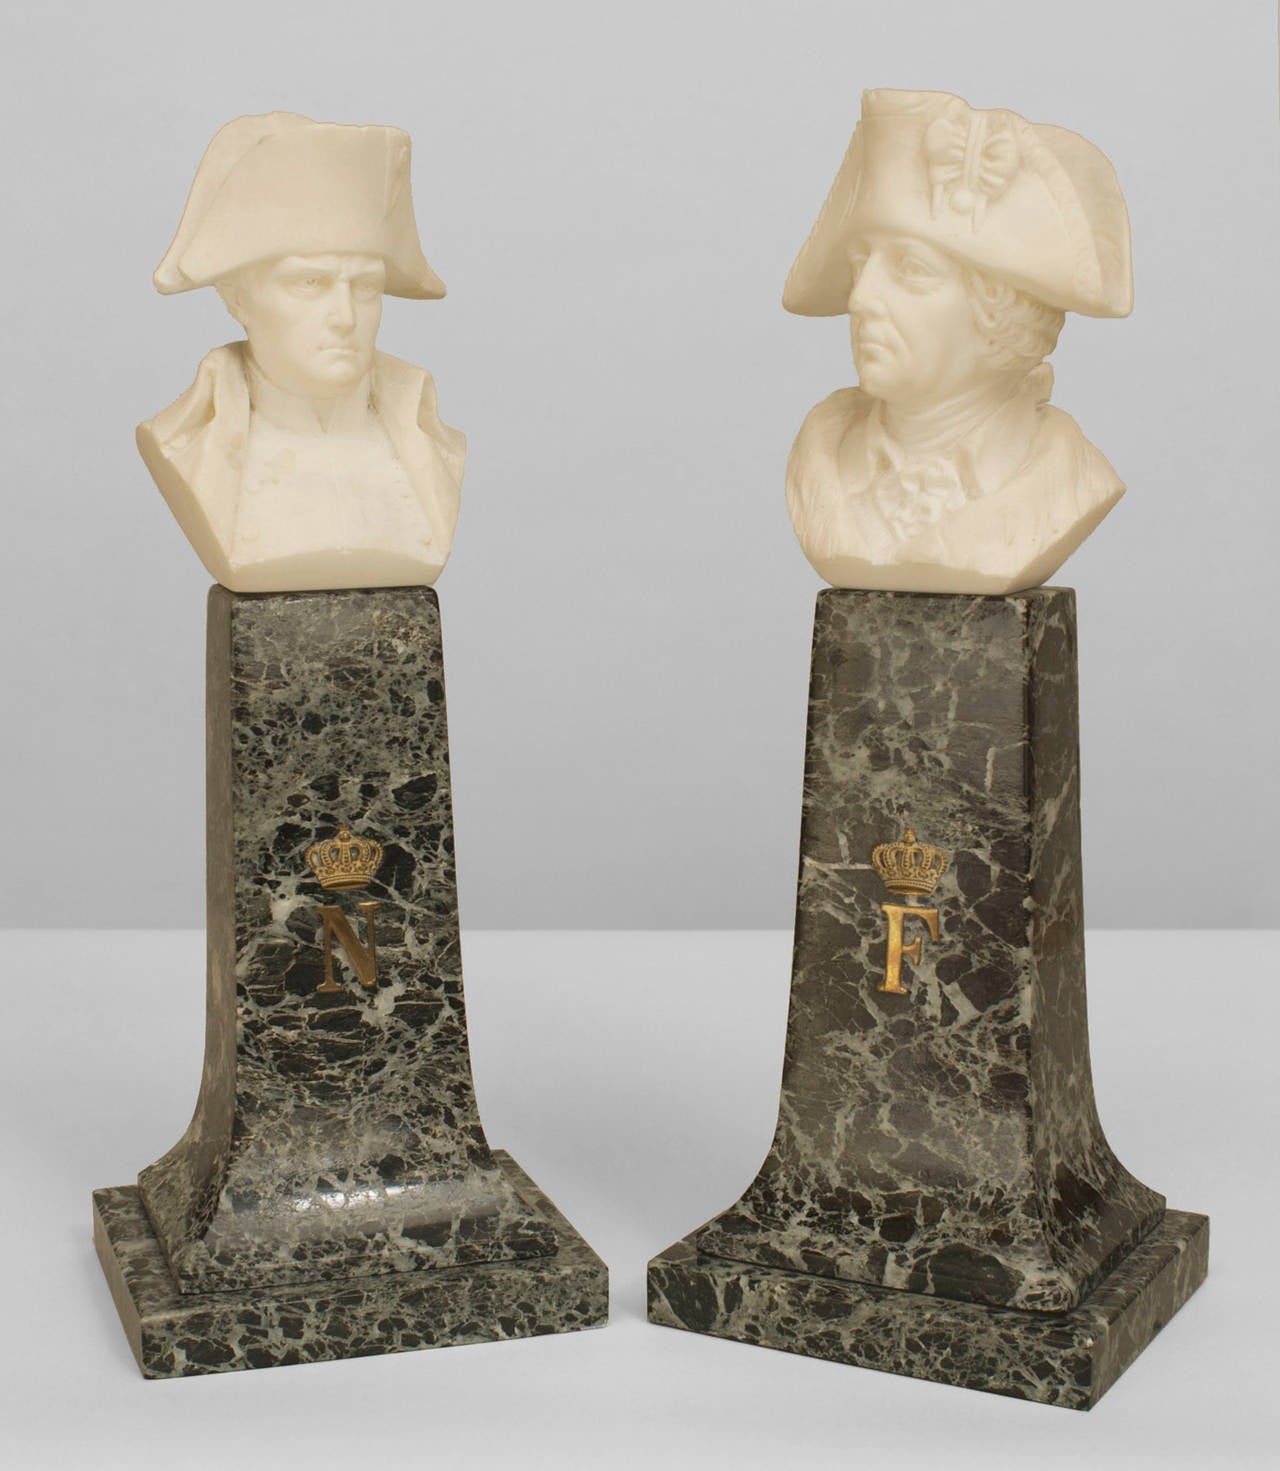 Pair of Continental German (19th/20th Cent) alabaster busts of Fredrick the Great and Napoleon raised on green marble column bases (by Fritz Kochendorfer and P. Braun) (as is-small chips to hat)
